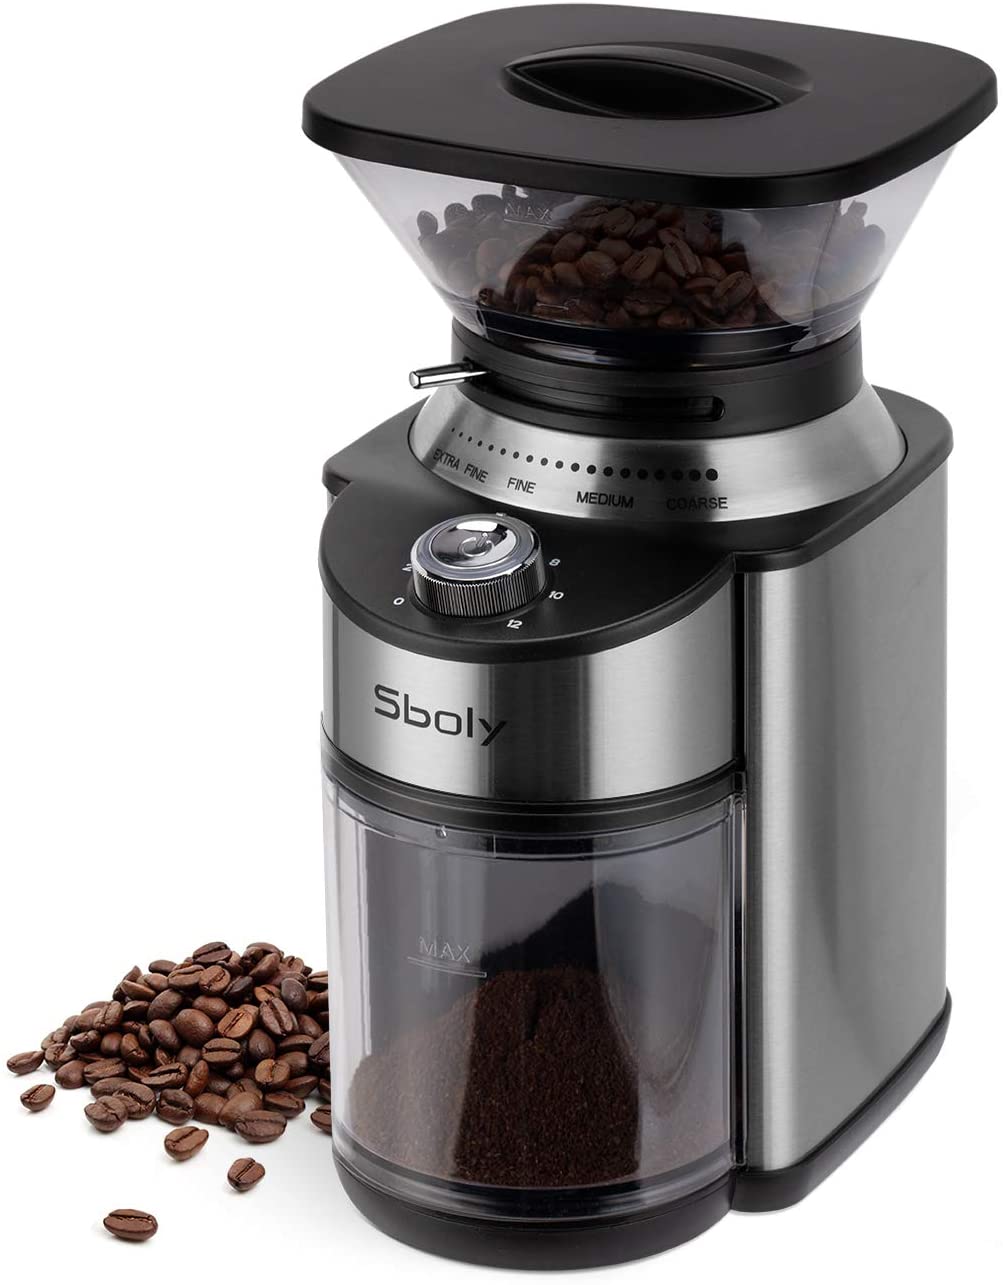 Sboly Conical Burr Coffee Grinder, Stainless Steel